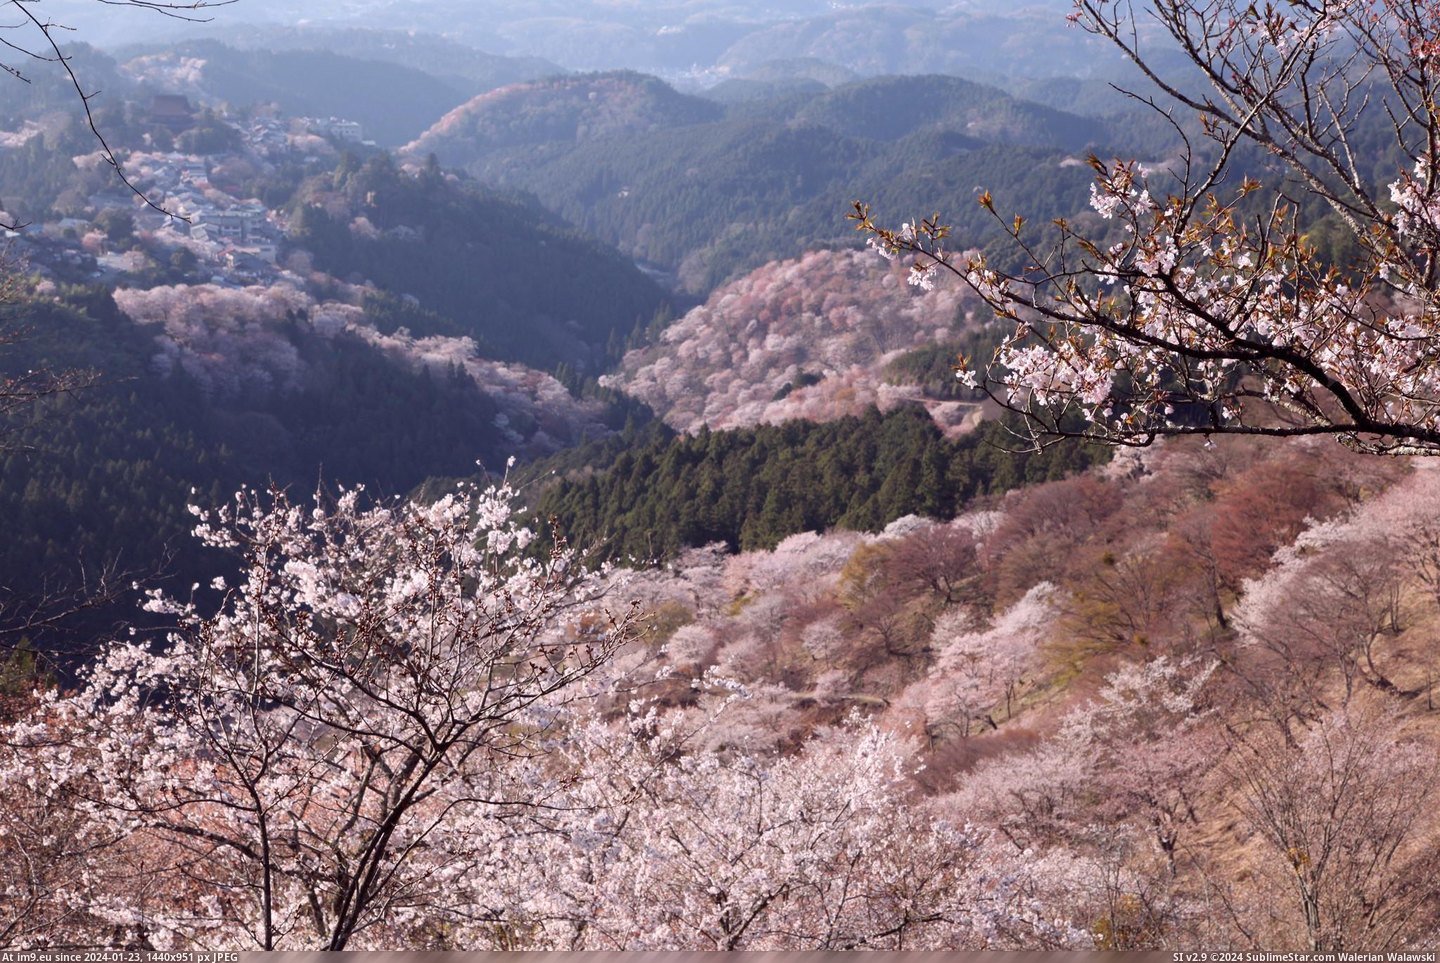 #Japan #Mountain #Covered #Yoshino #Mountainside #Cherry #2048x1365 #Blossoms [Earthporn] A mountainside covered in cherry blossoms at Yoshino Mountain, Japan [2048x1365] Pic. (Image of album My r/EARTHPORN favs))